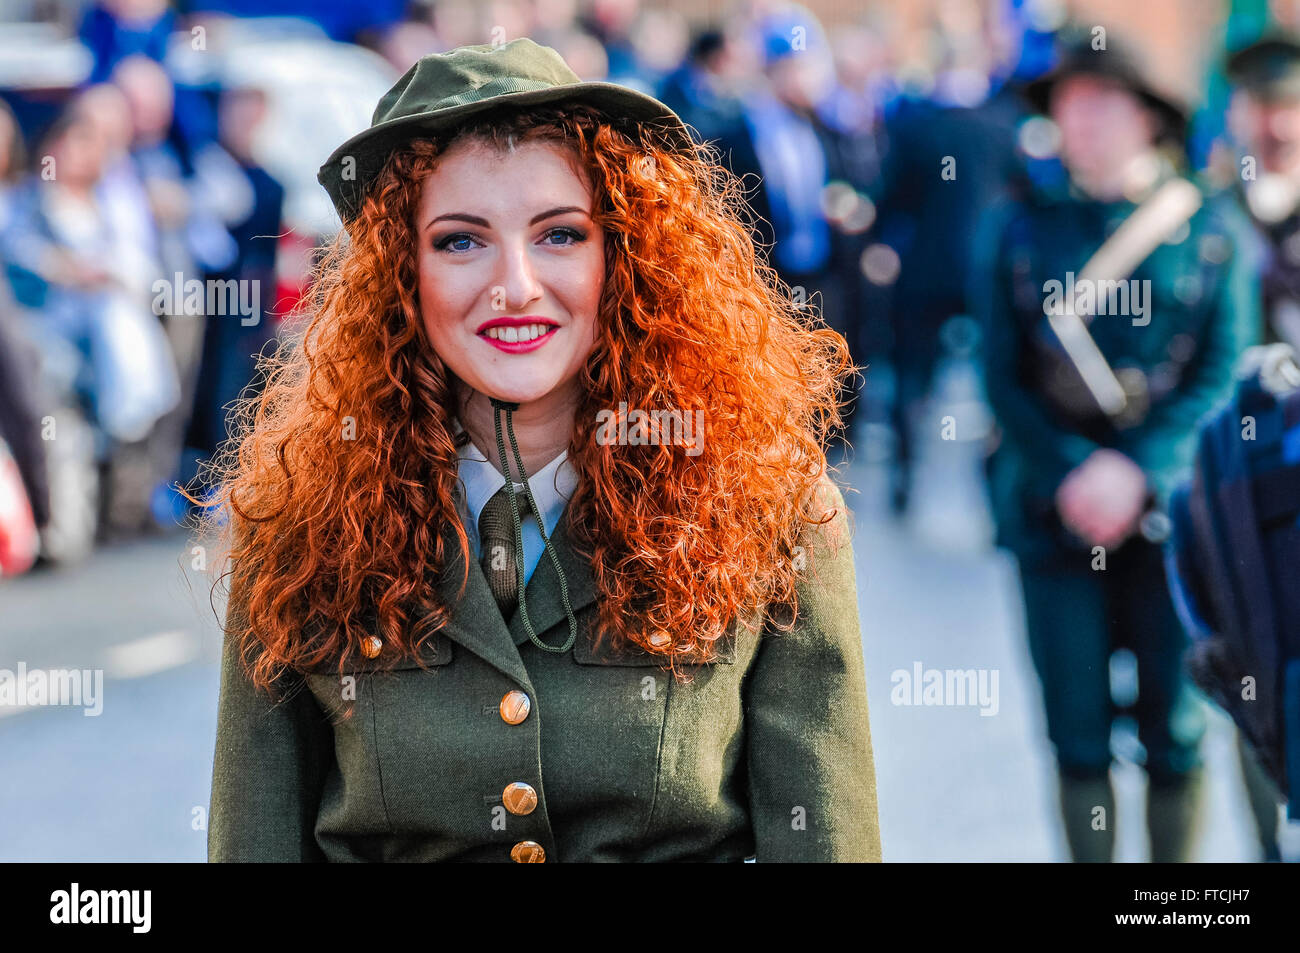 Belfast, Northern Ireland. 27 Mar 2016 - Connlaith Pickering wearing a reproduction military uniform from the Irish Civilian Army (ICA) at the 1916 Irish Easter Rising centenary celebration parade. Credit:  Stephen Barnes/Alamy Live News Stock Photo